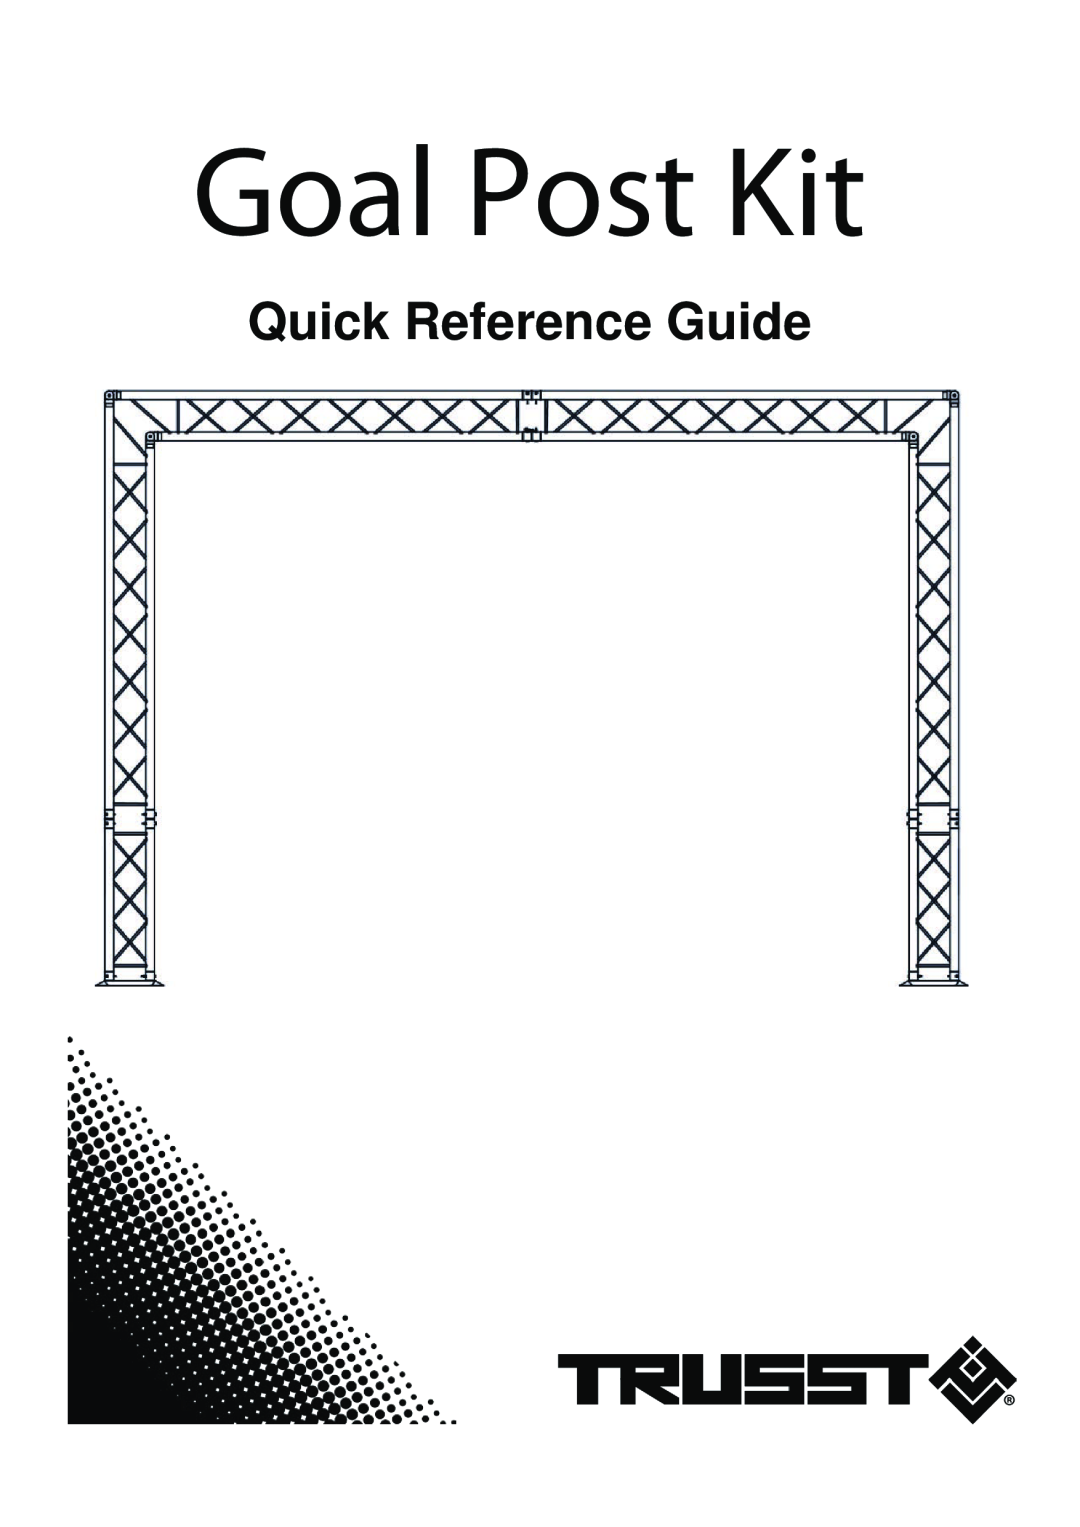 Chauvet 595 manual Goal Post Kit, Quick Reference Guide 